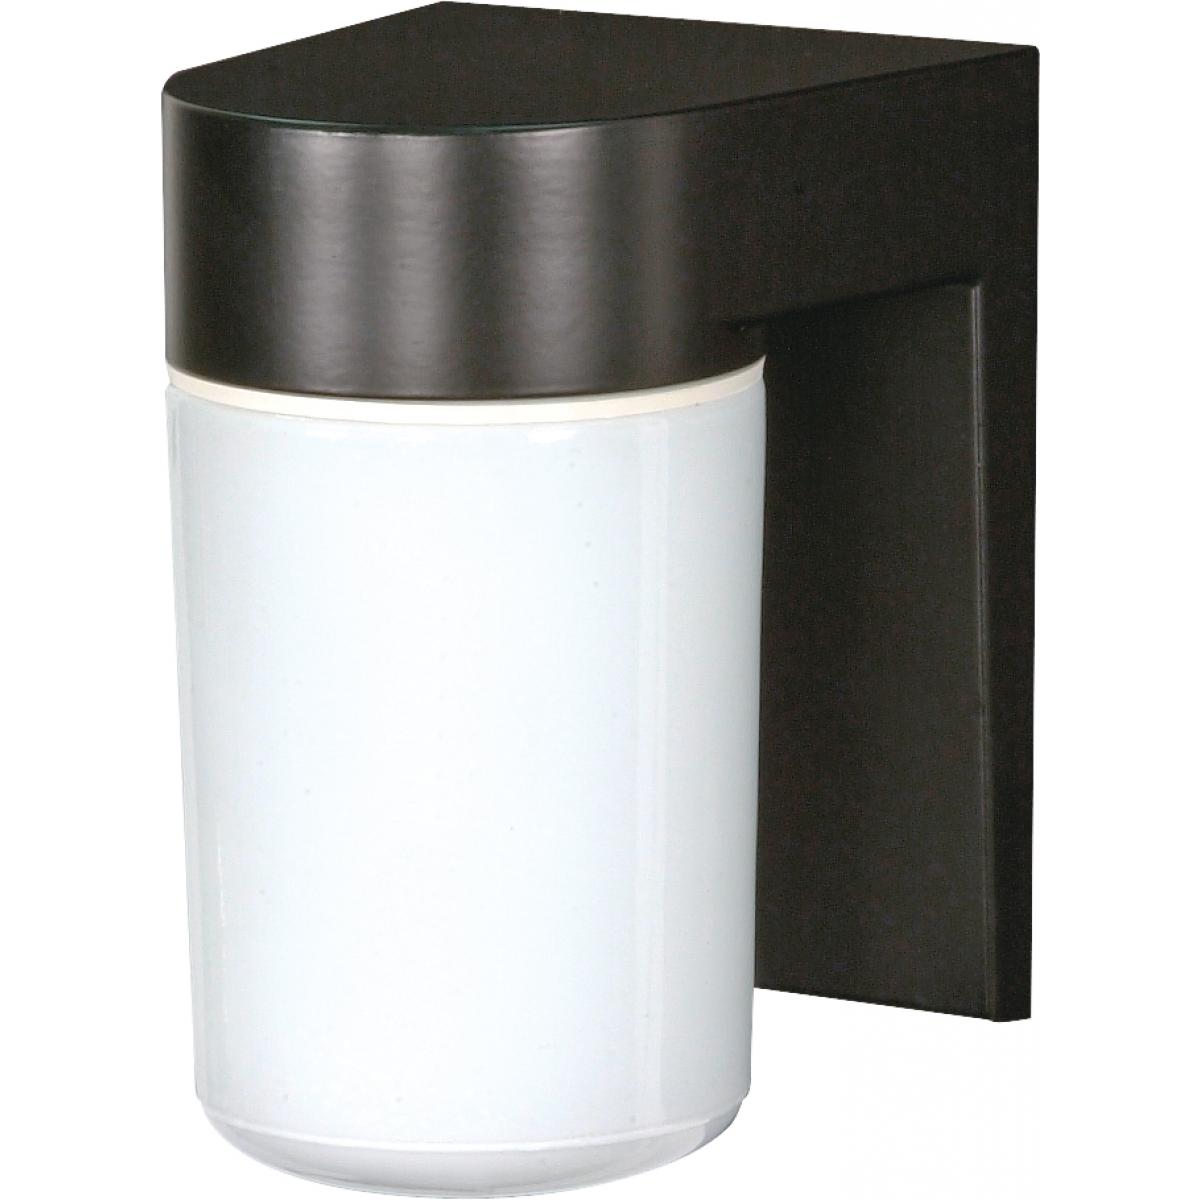 Satco 77-137 1 Light - 8" - Utility Wall Mount - With White Glass Cylinder - Black Finish